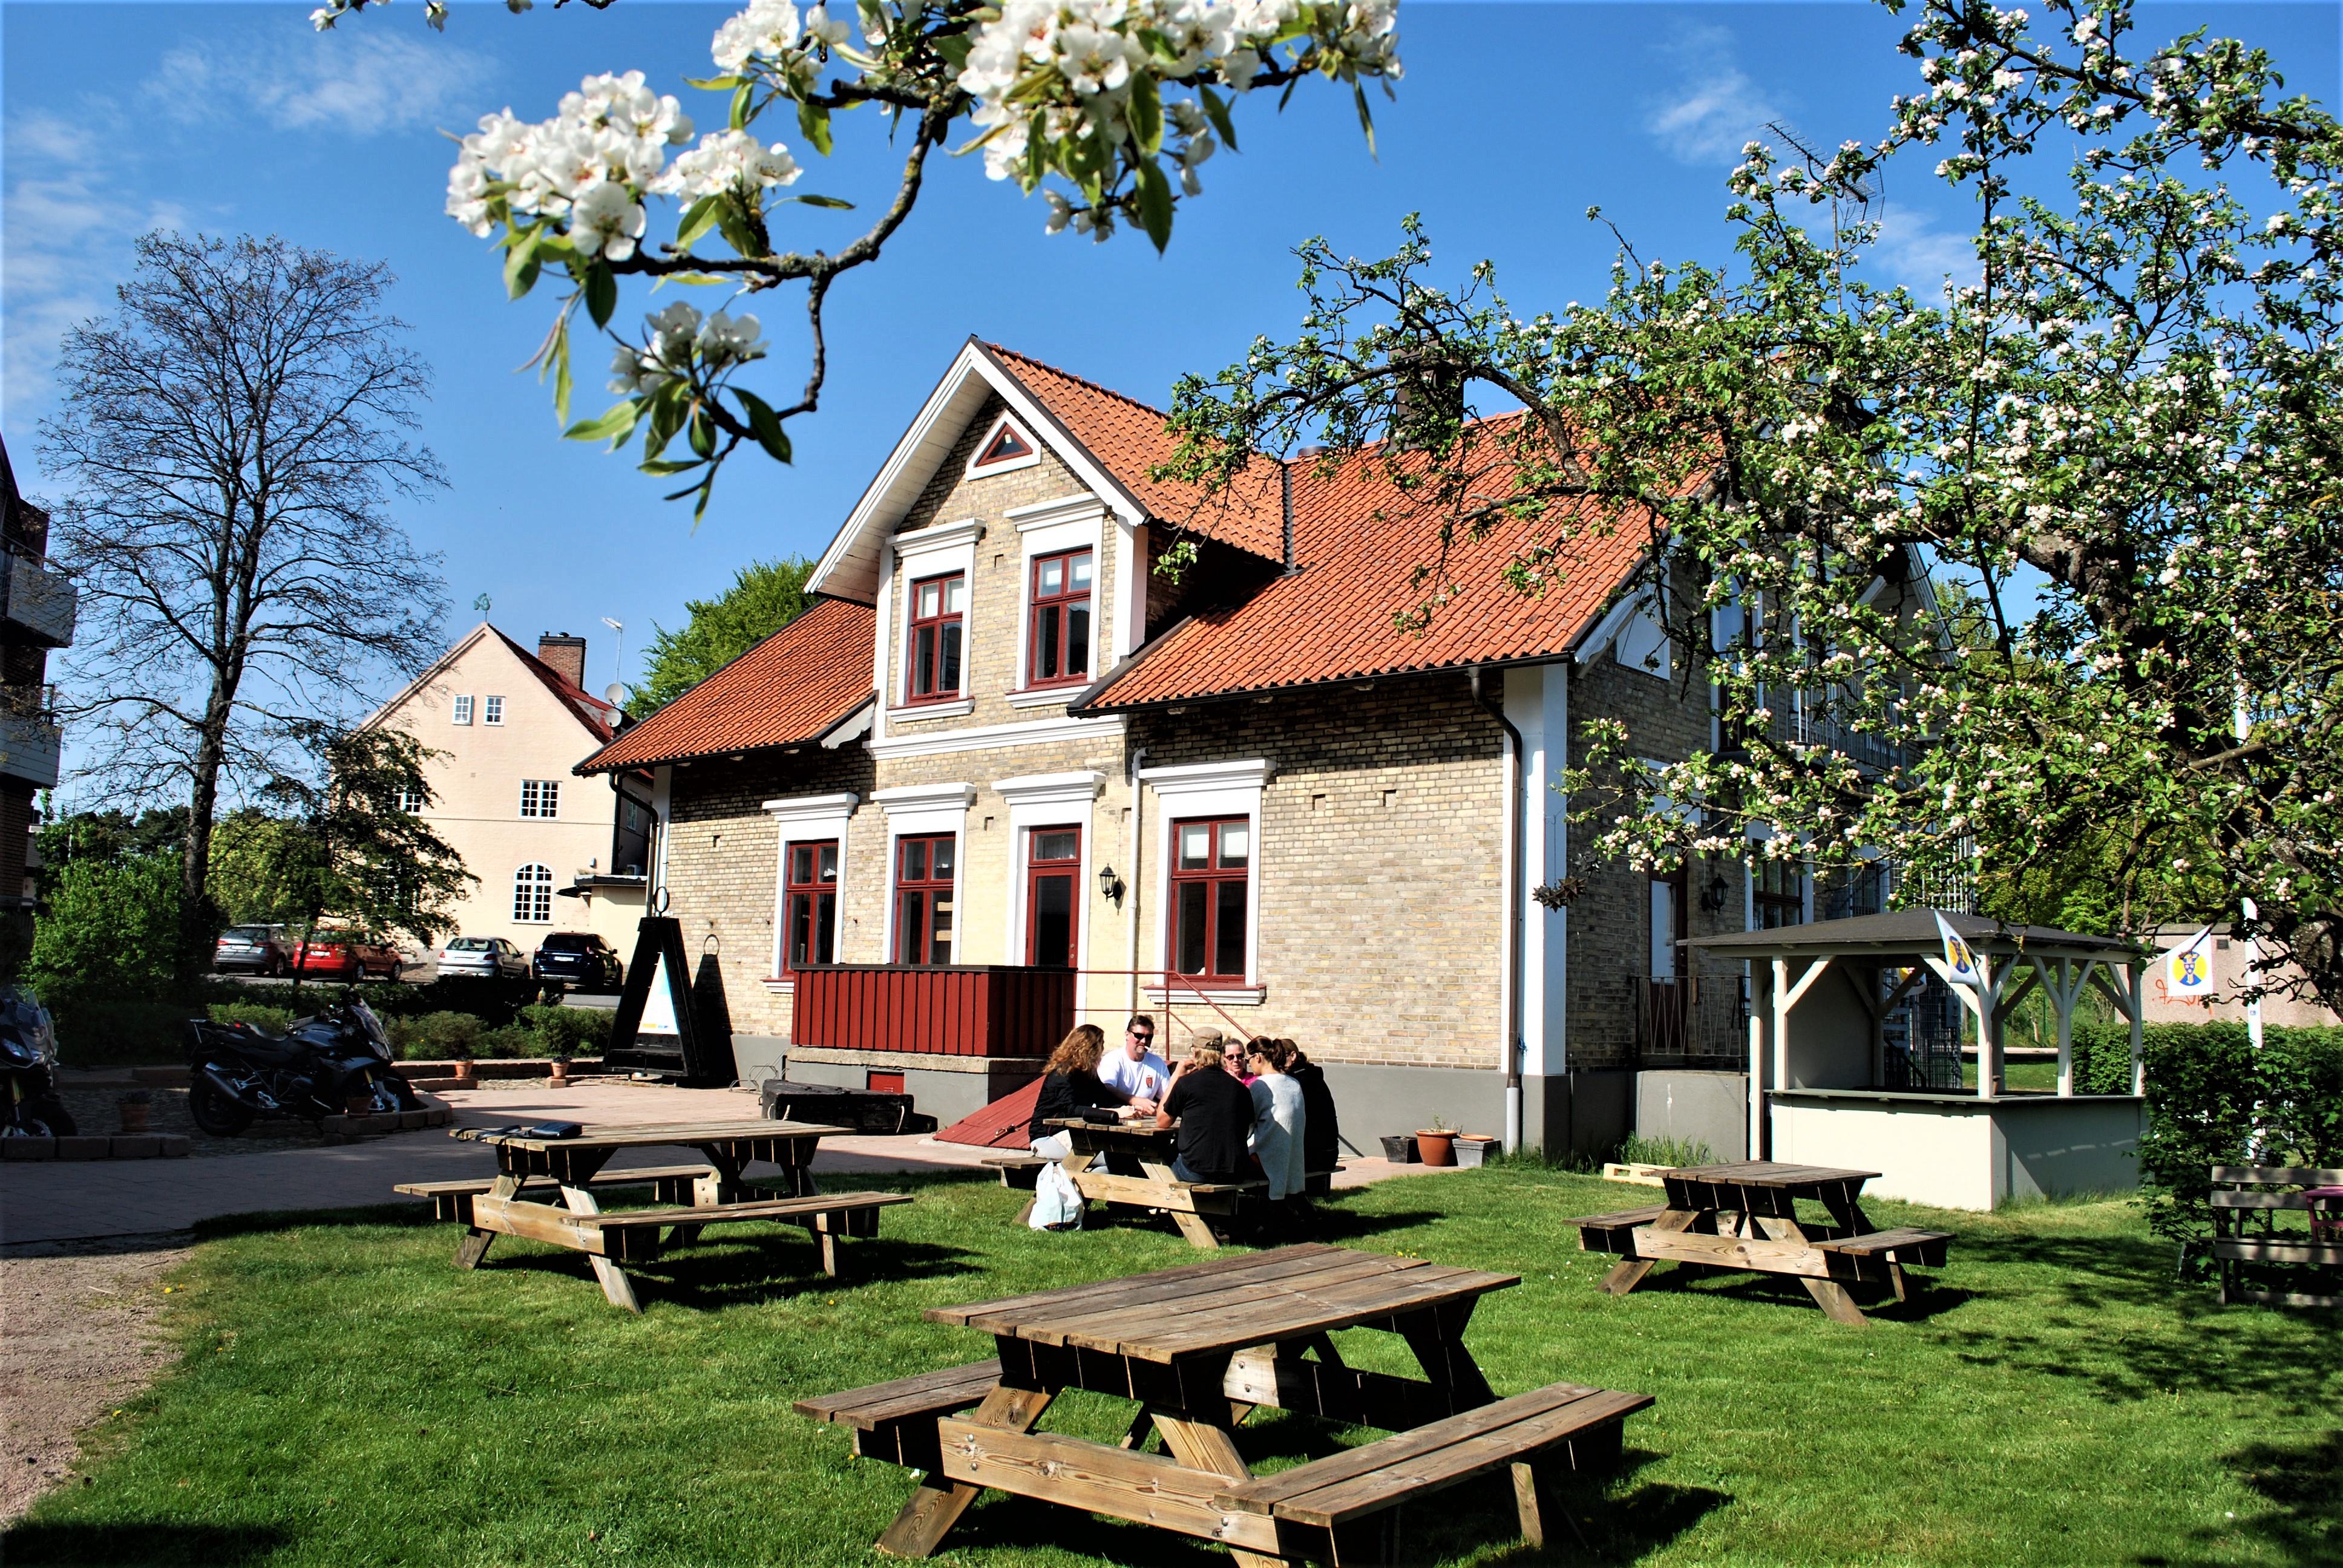 Cigarrkungens B&B <br/>87.05 ew <br/> <a href='http://vakantieoplossing.nl/outpage/?id=d80109597e097dfd3a968c2598bcd53d' target='_blank'>View Details</a>